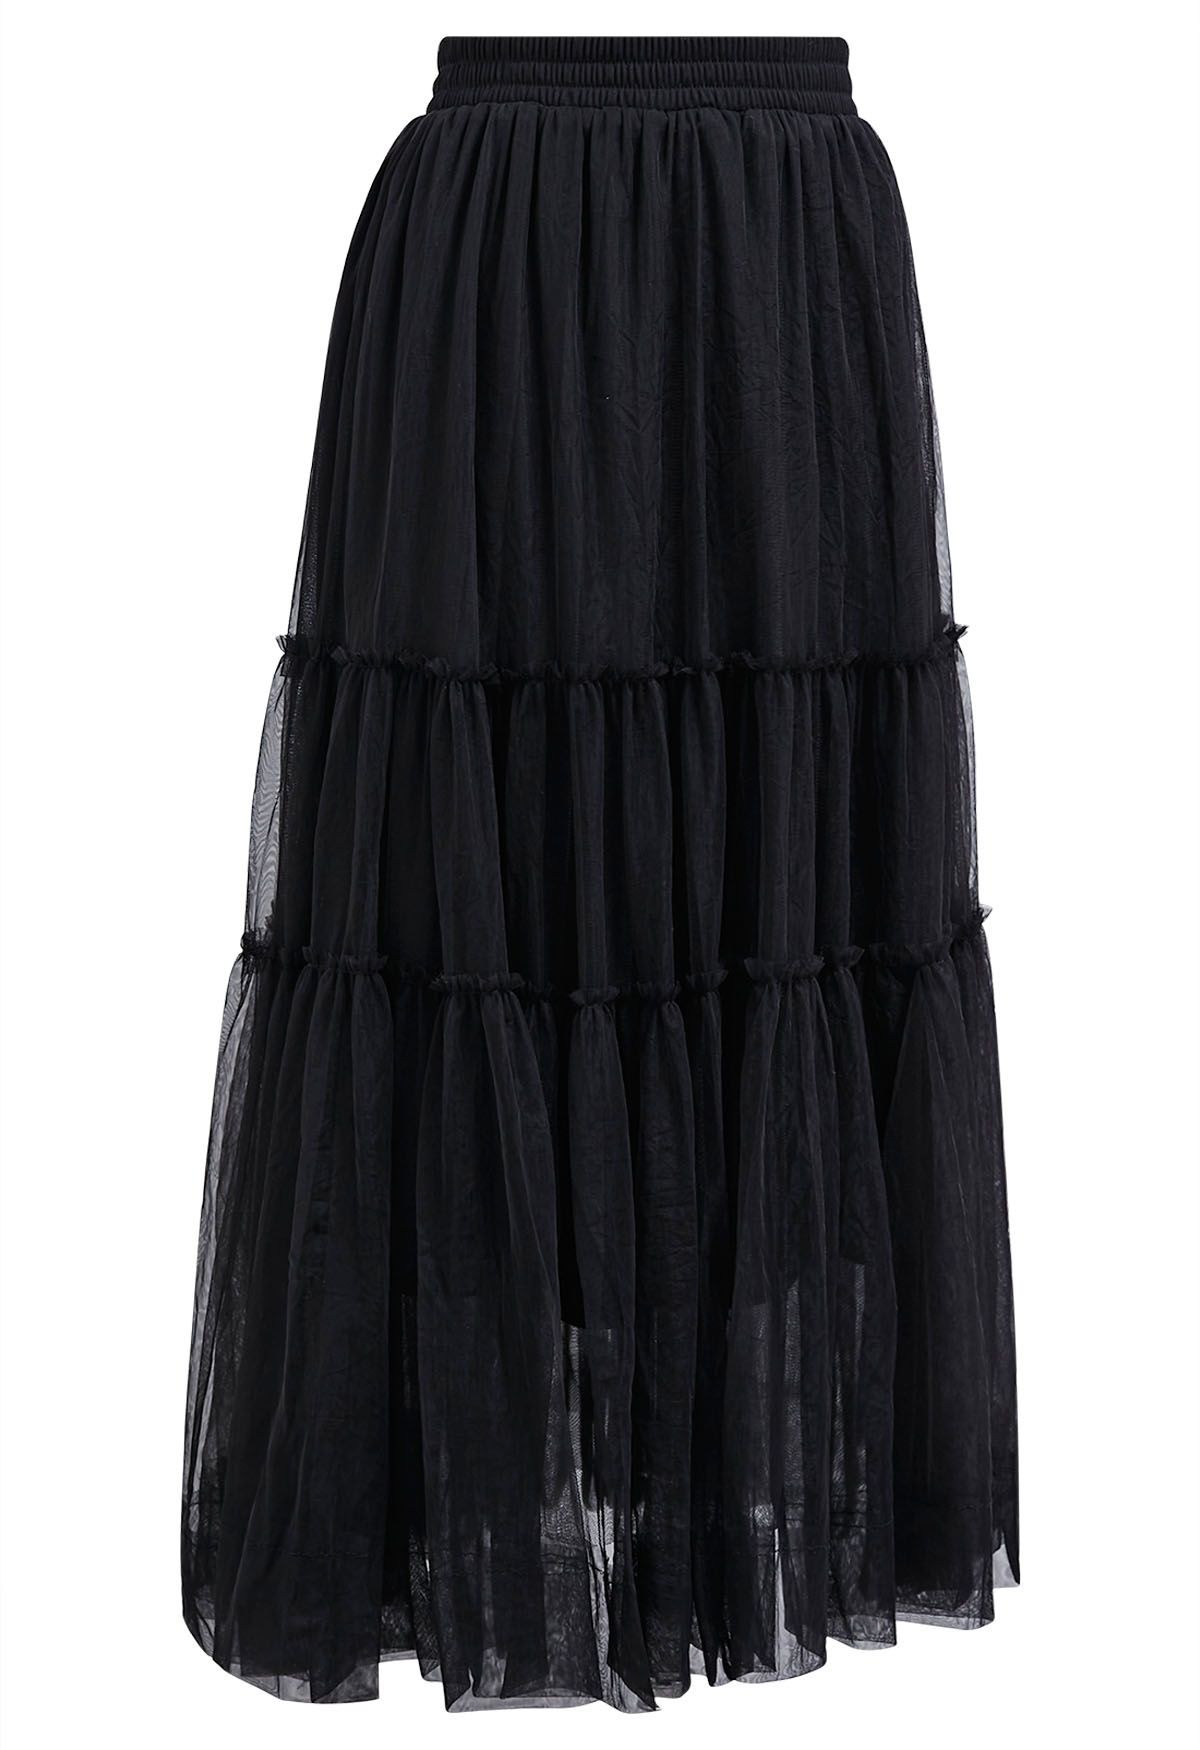 Ruffles Adorned Mesh Tulle Midi Skirt in Black - Retro, Indie and ...